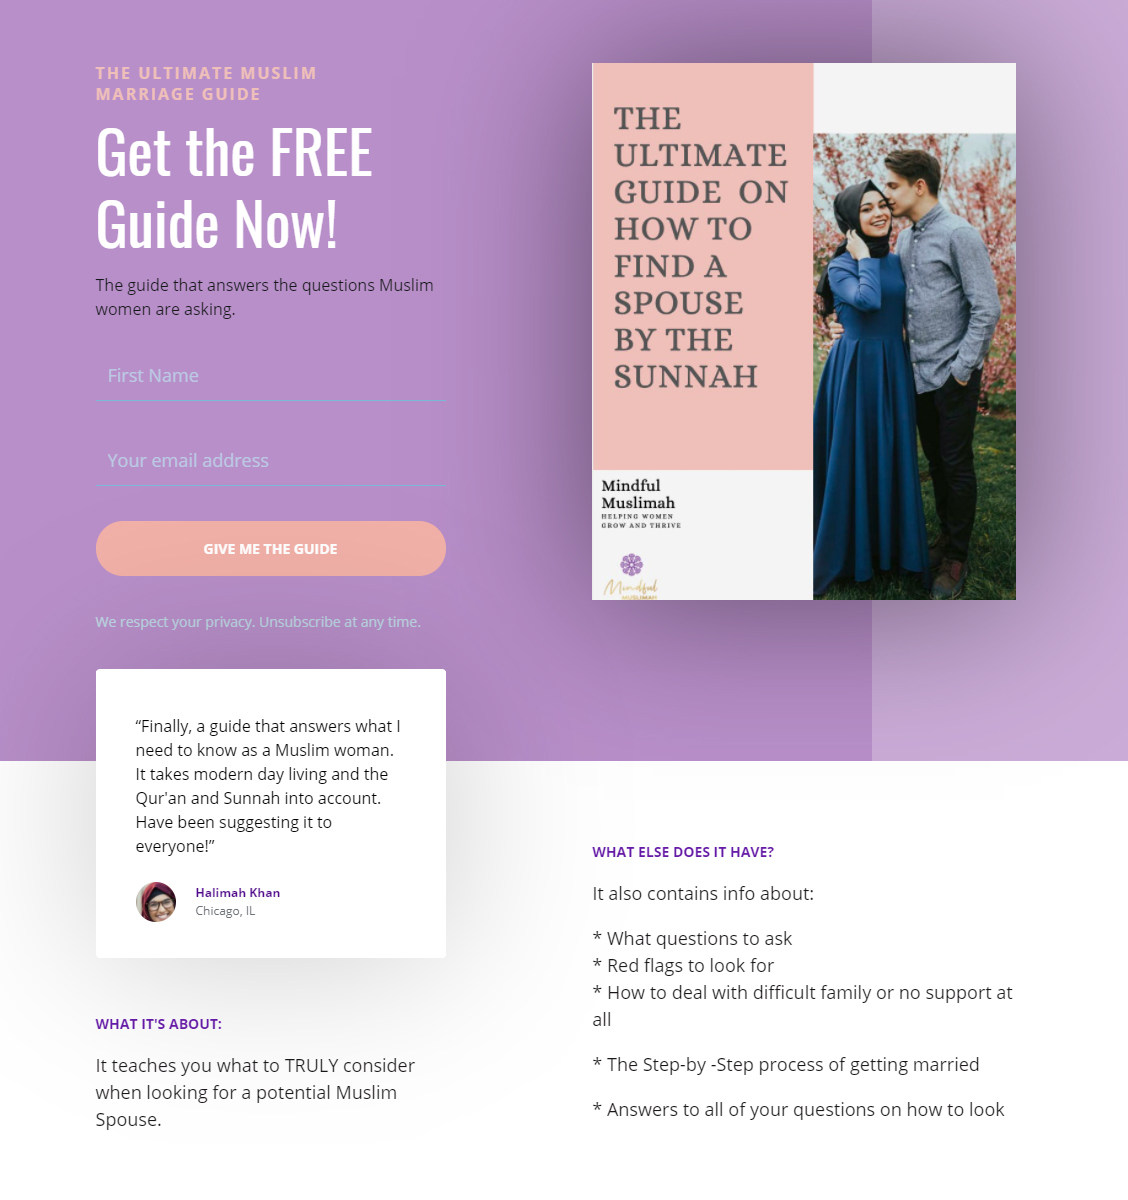 The Ultimate muslime marriage guide. Fill up the form to get the free guide now